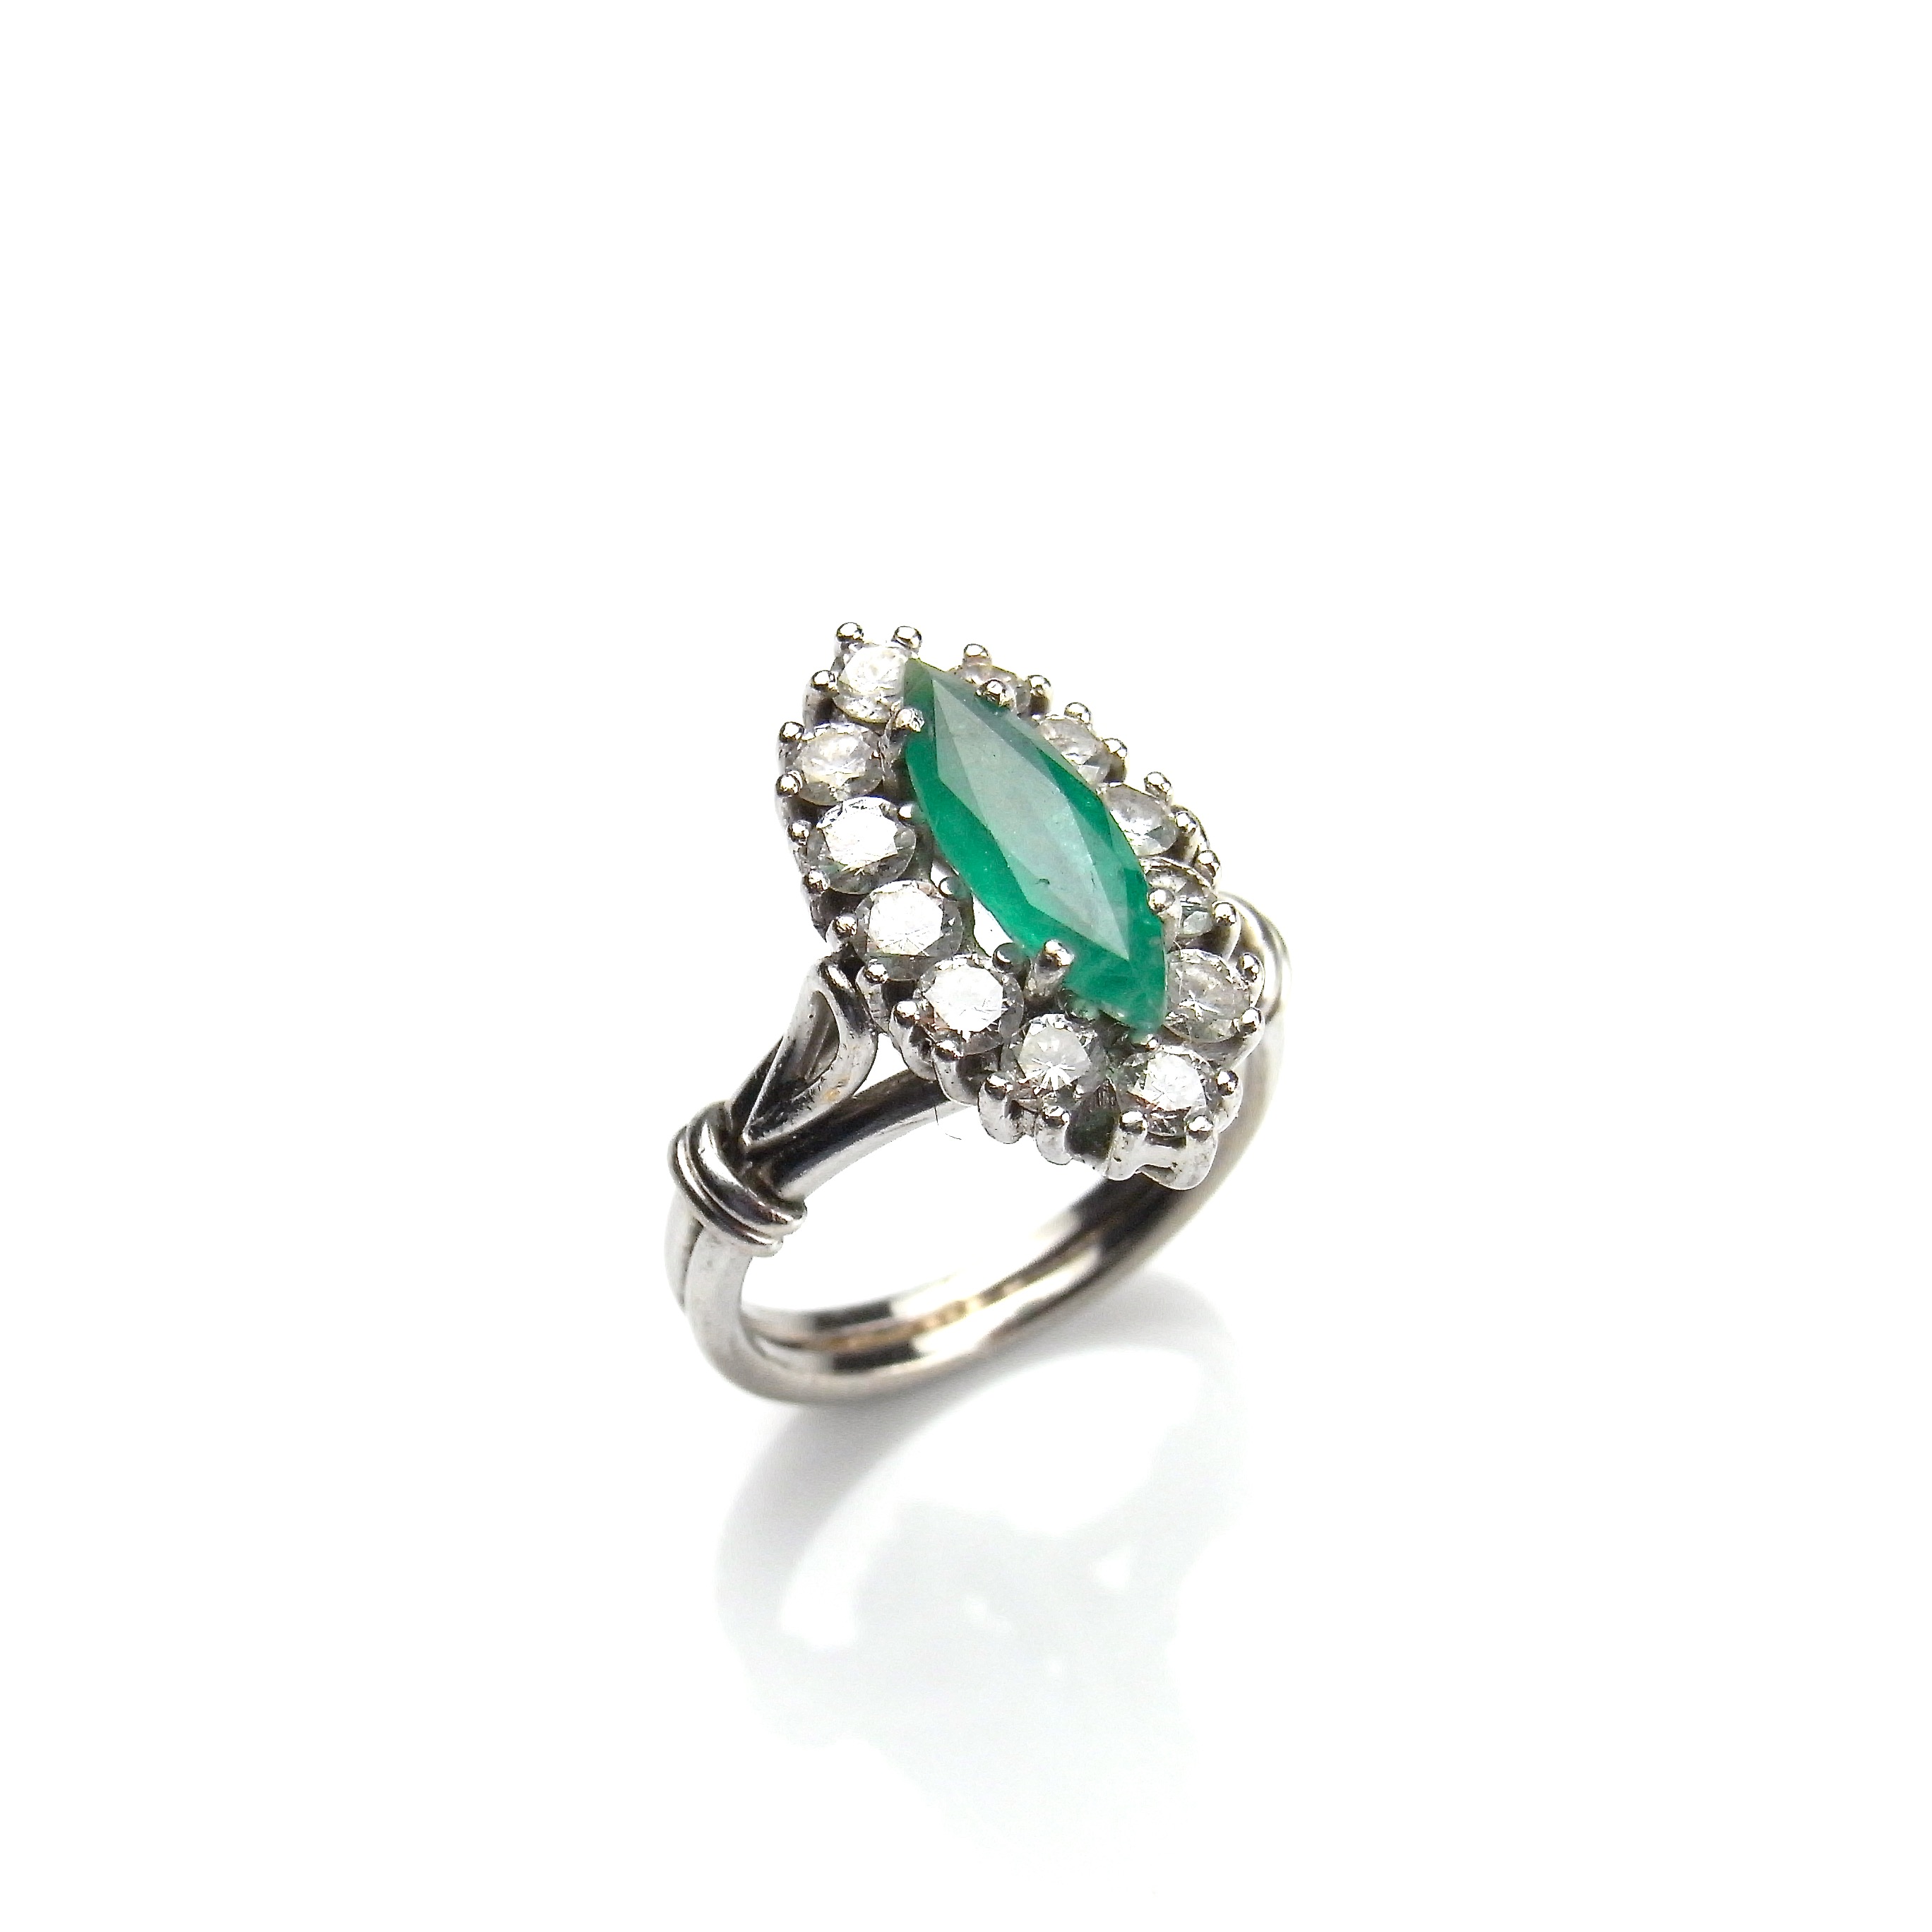 White gold emerald and diamond marquise ring.